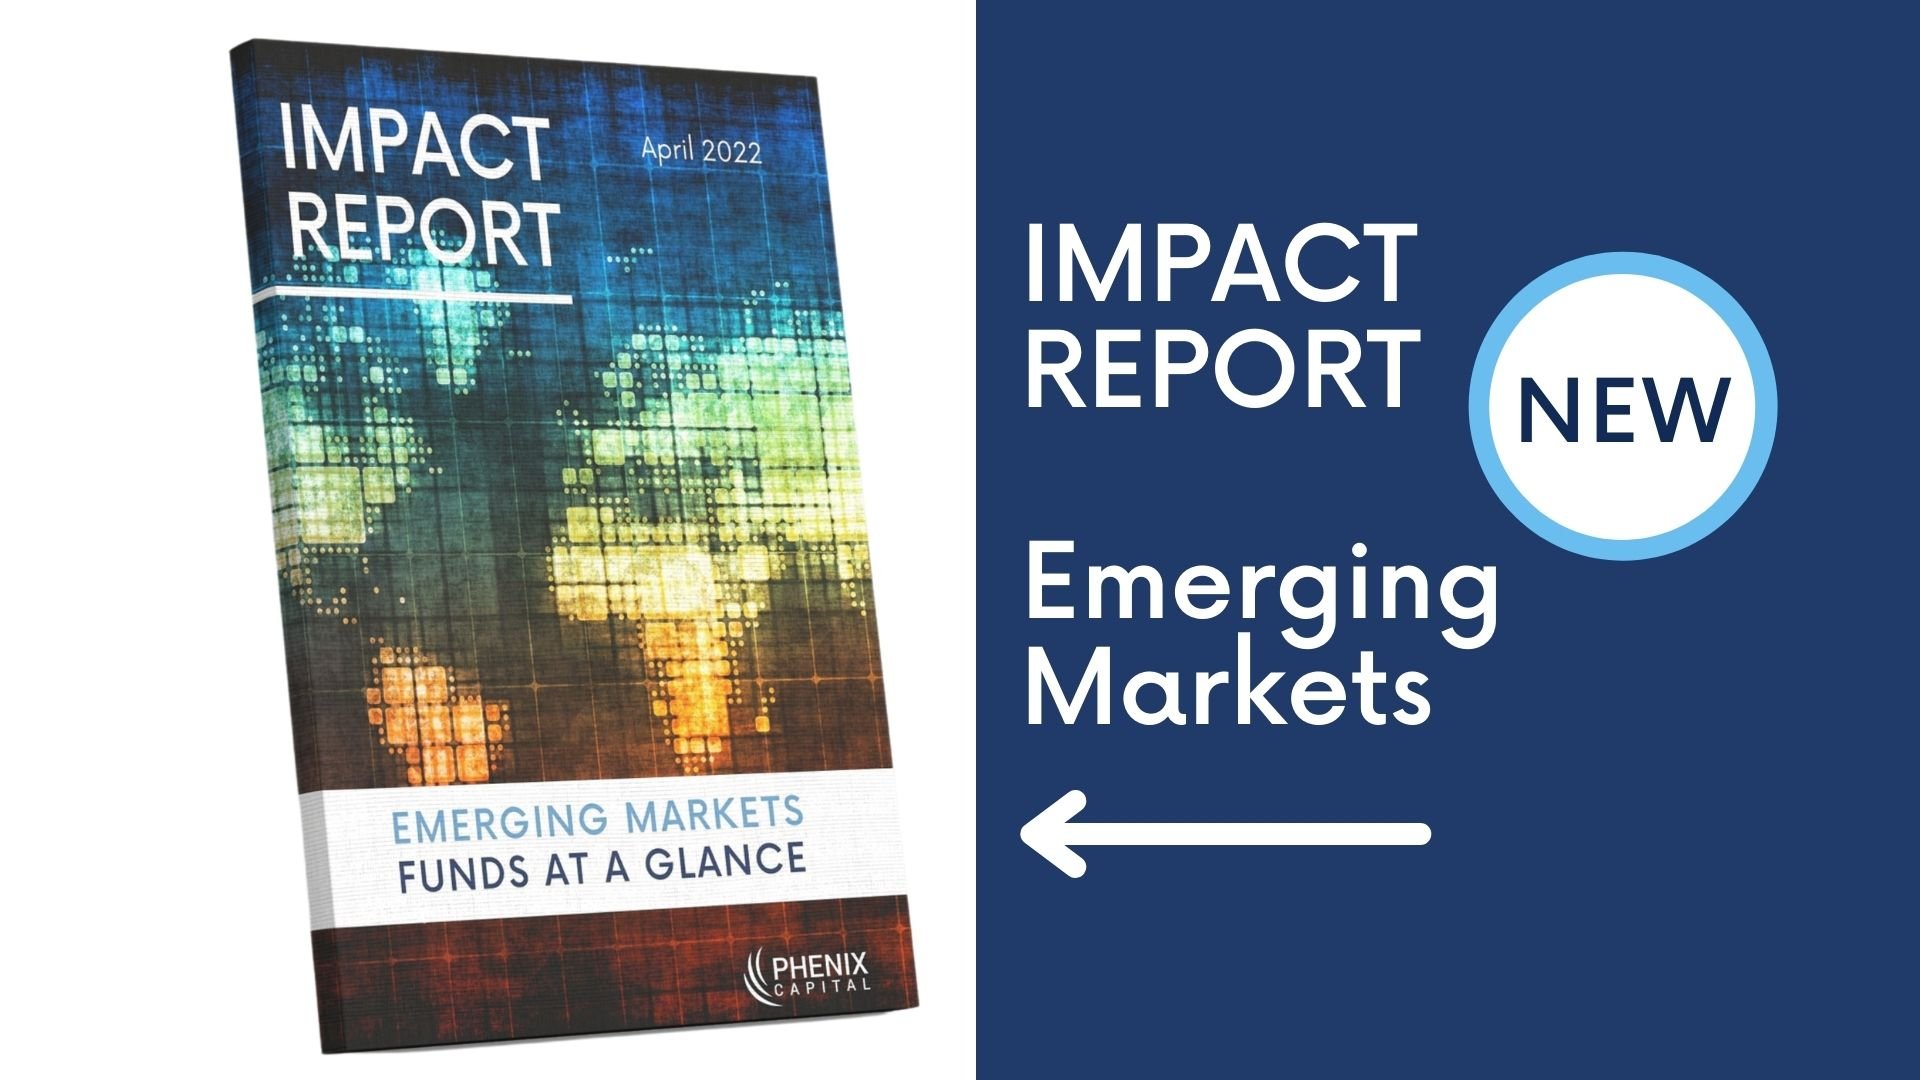 PRESS RELEASE: 729 funds target emerging markets - €96 billion has been already committed